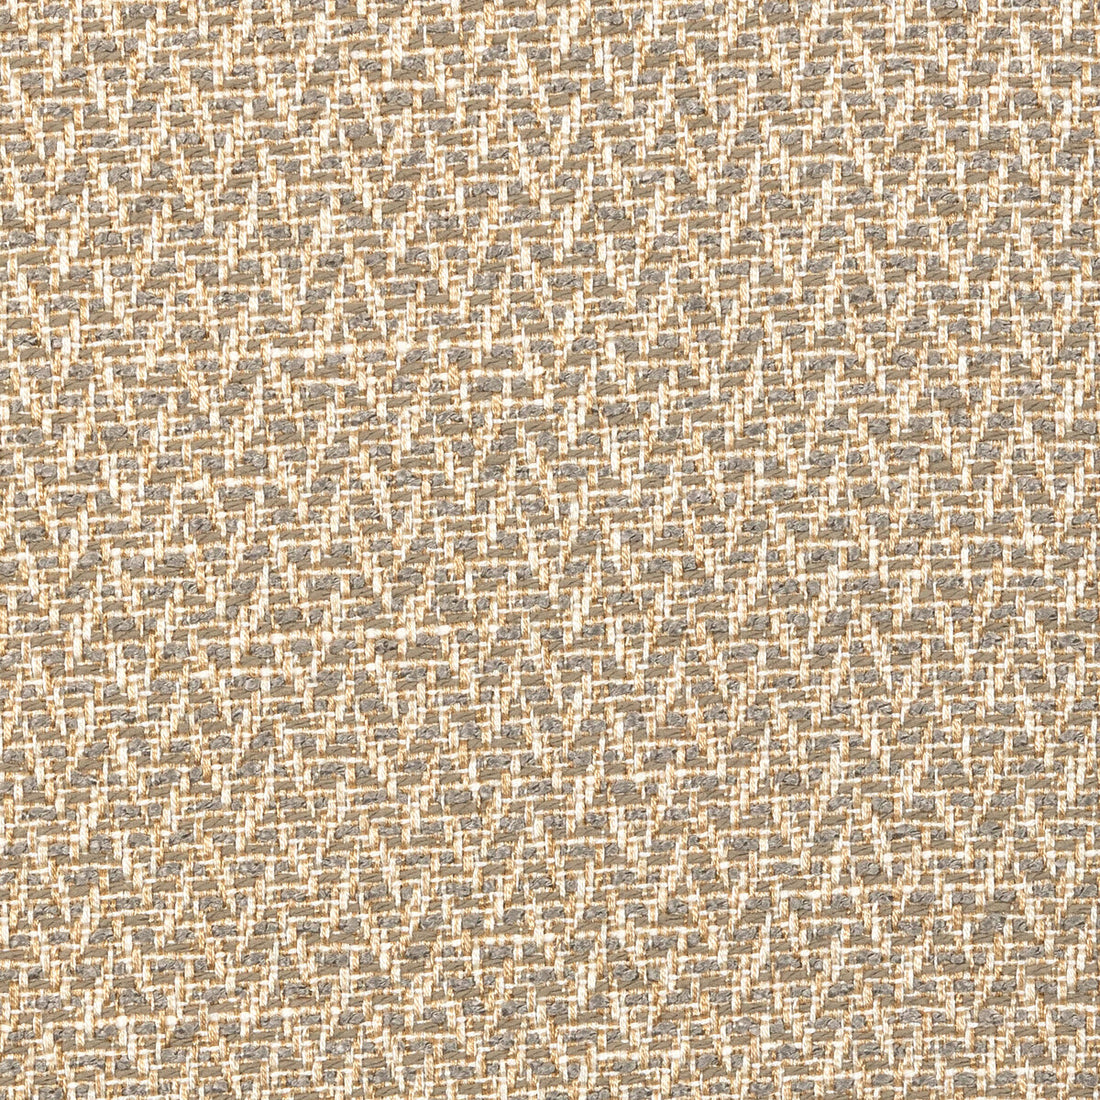 Kravet Design fabric in 36418-1611 color - pattern 36418.1611.0 - by Kravet Design in the Performance Crypton Home collection